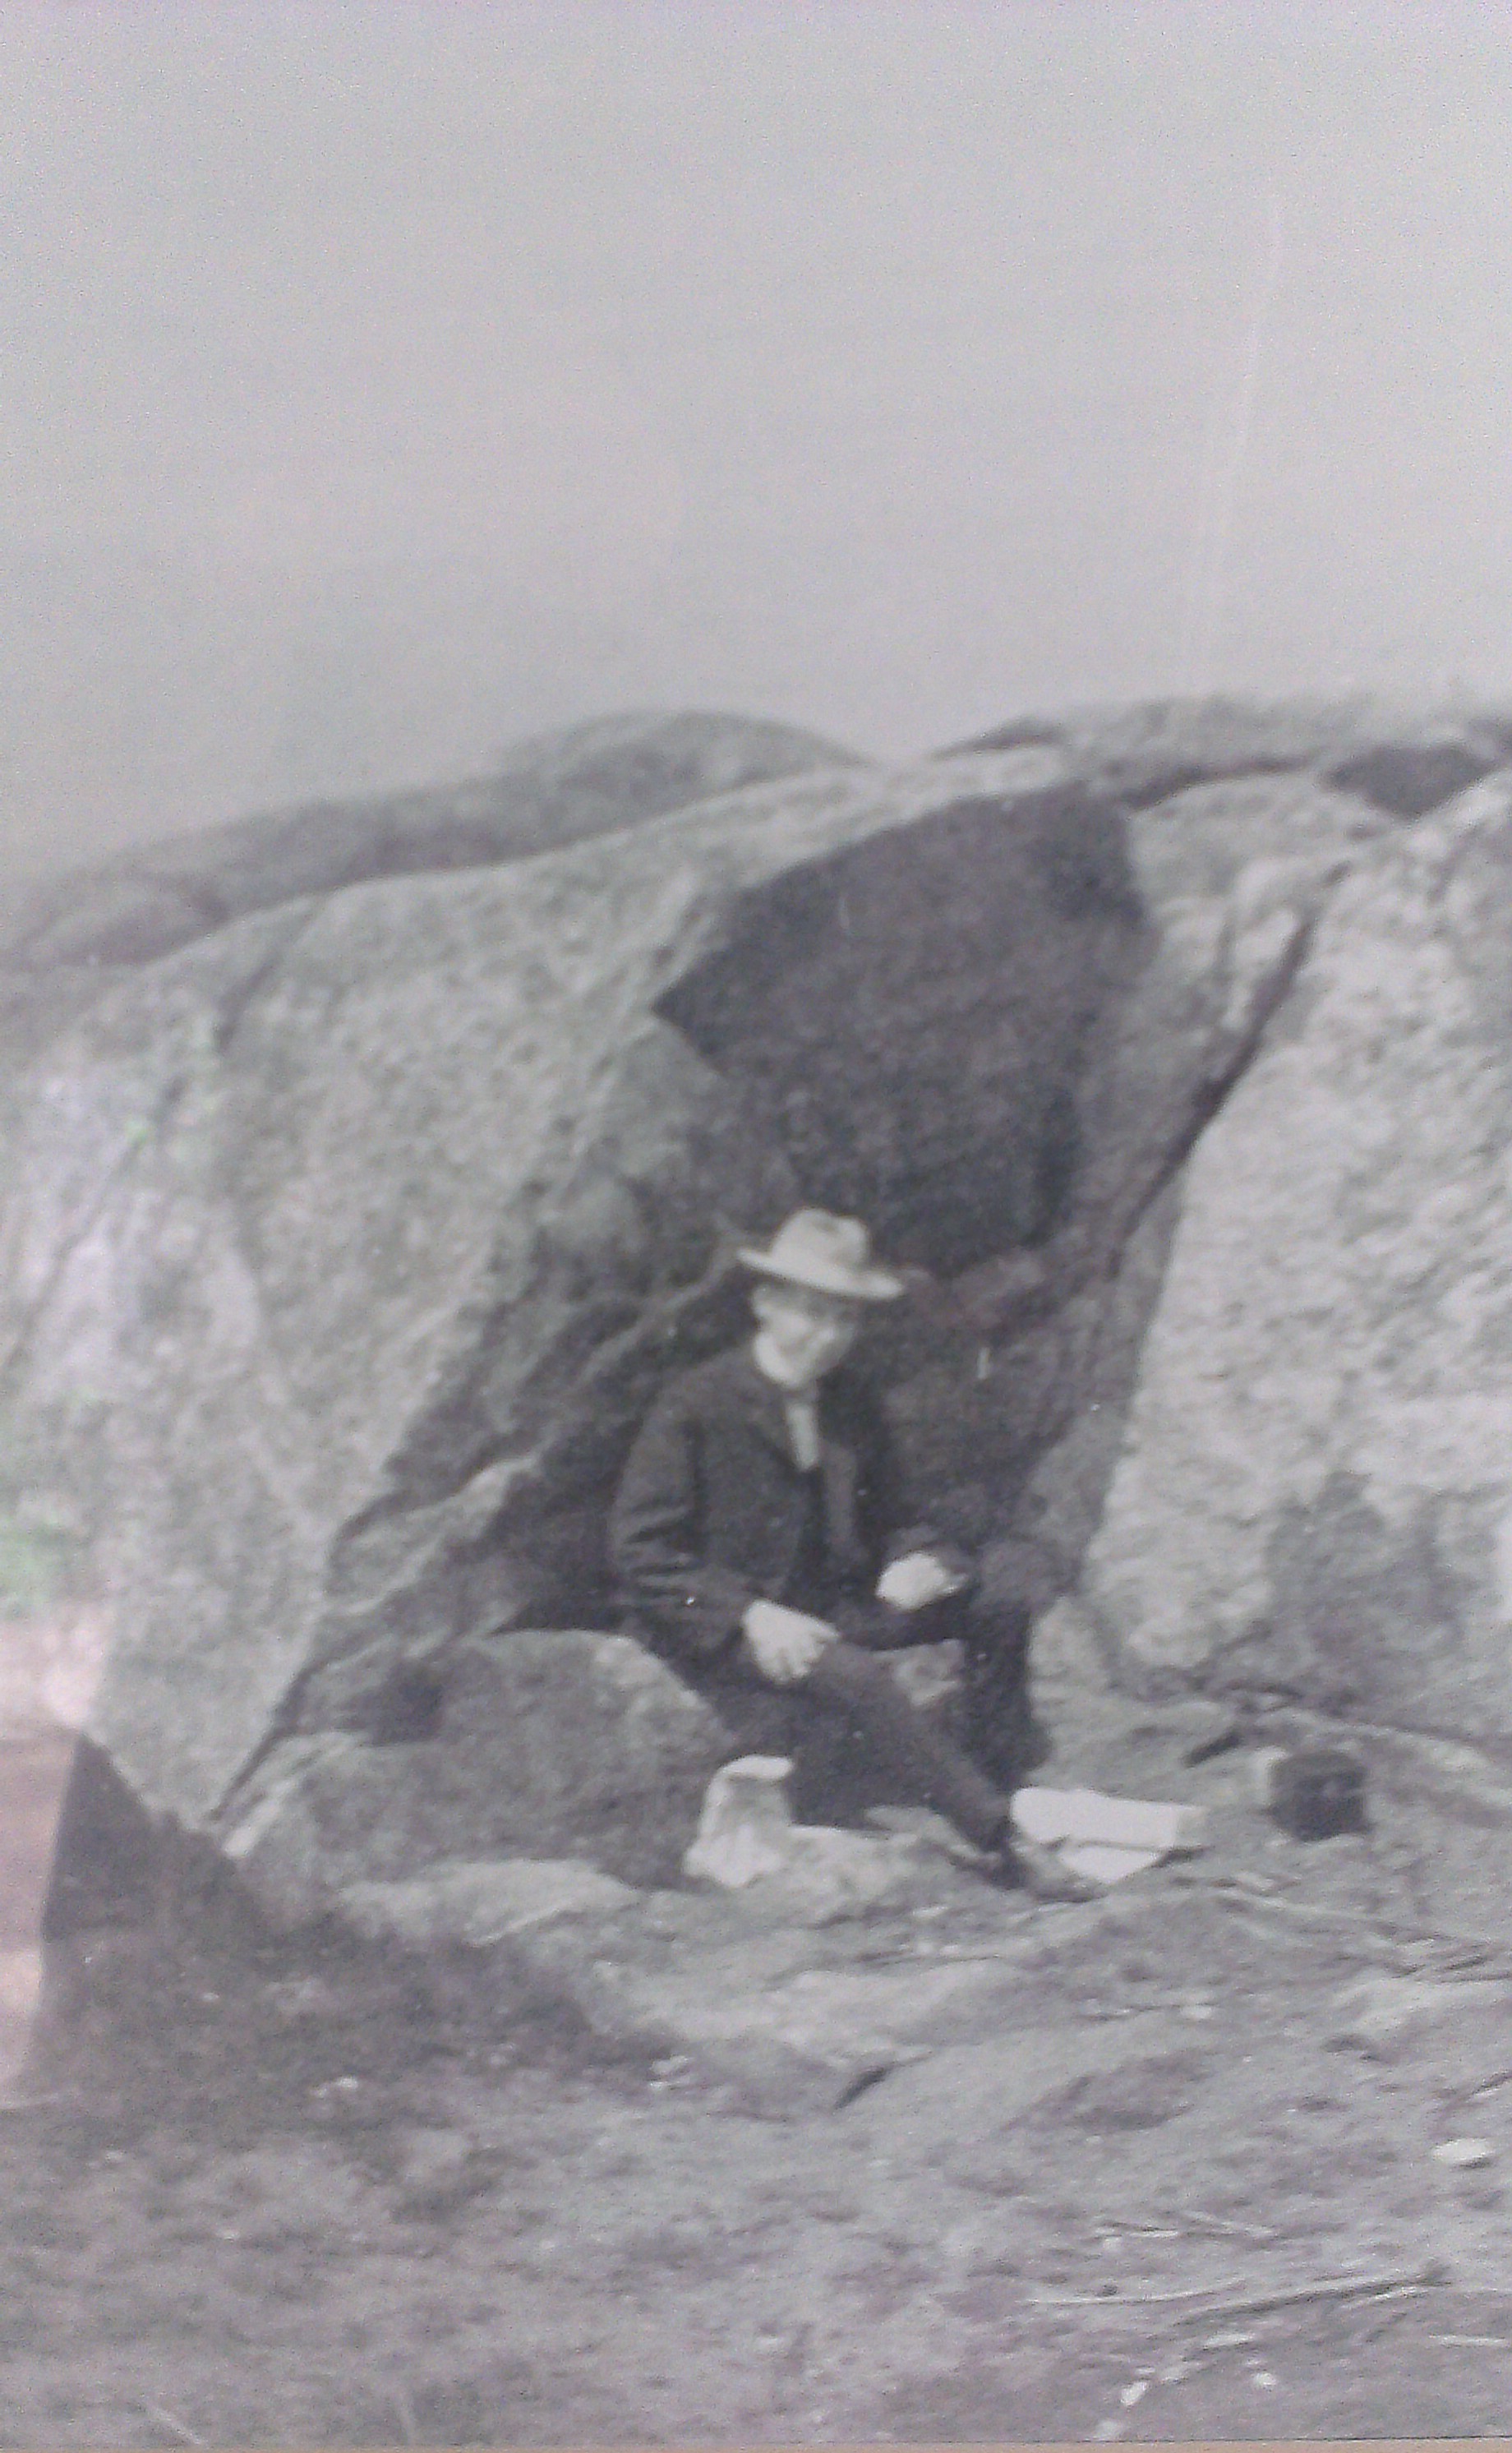 A hiker finds comfort in the "Cellar", many years before any buildings were constructed at Monadnock's Summit. This full photograph can be viewed in the Monadnock State Park Visitor Center.